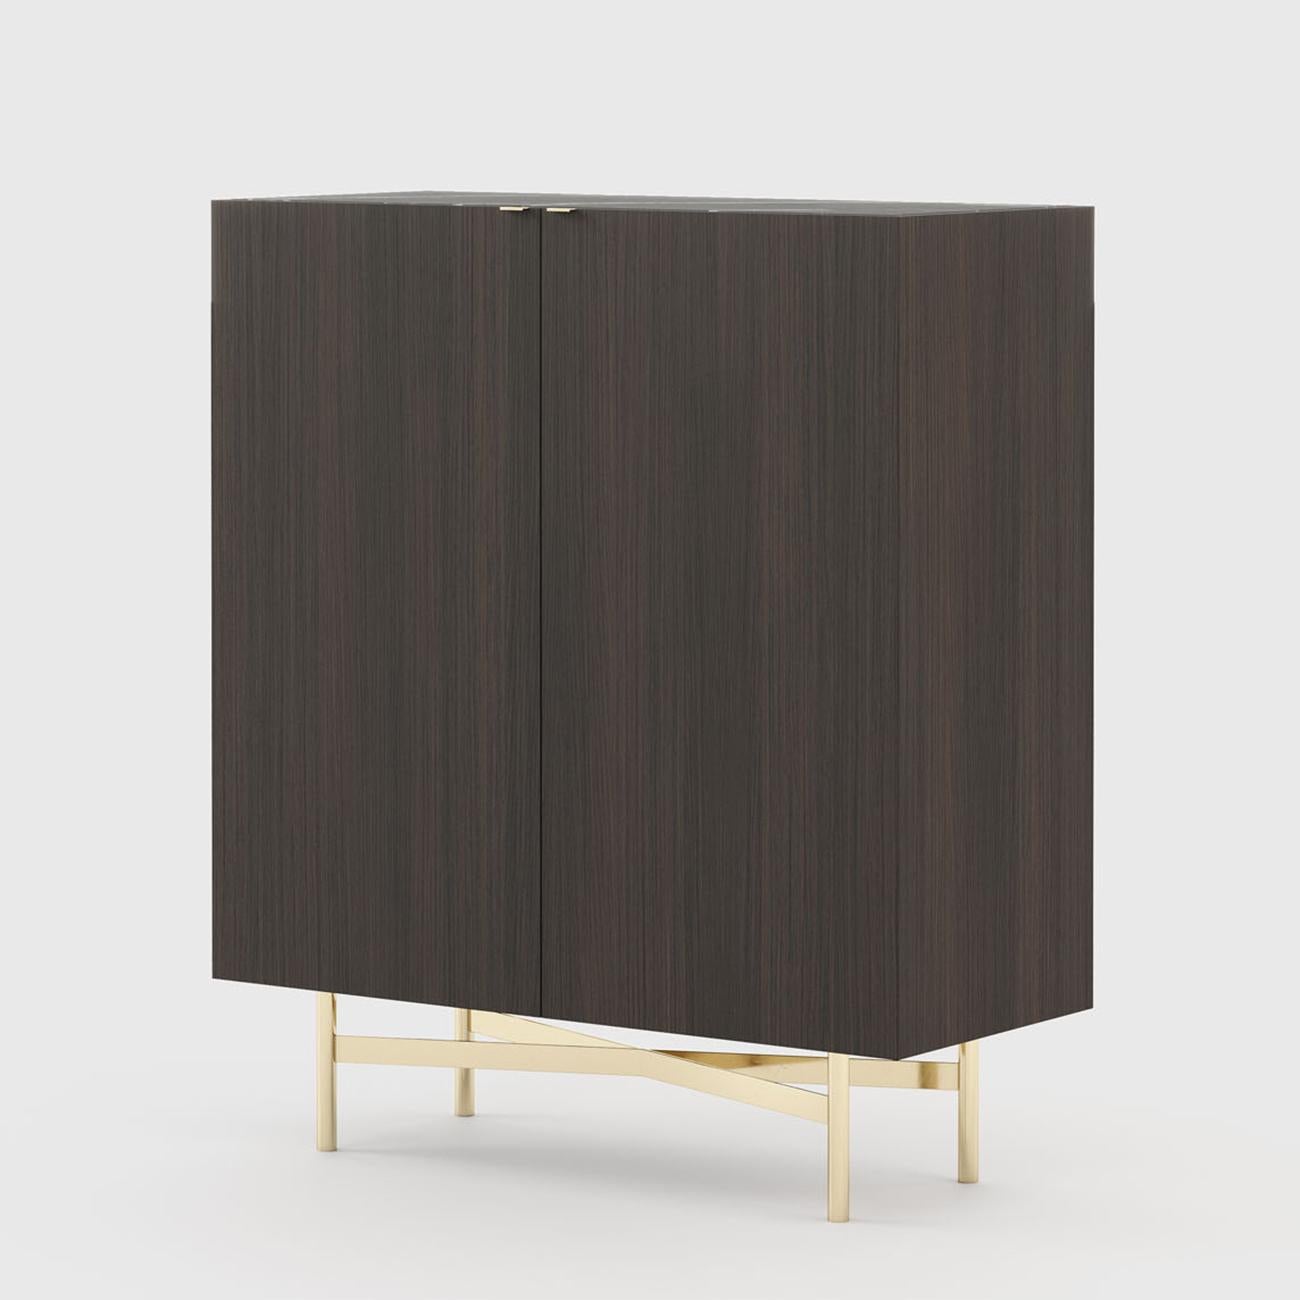 Bar Chicago with wood structure in smocked oak matte
finish and with polished stainless steel base in gold finish.